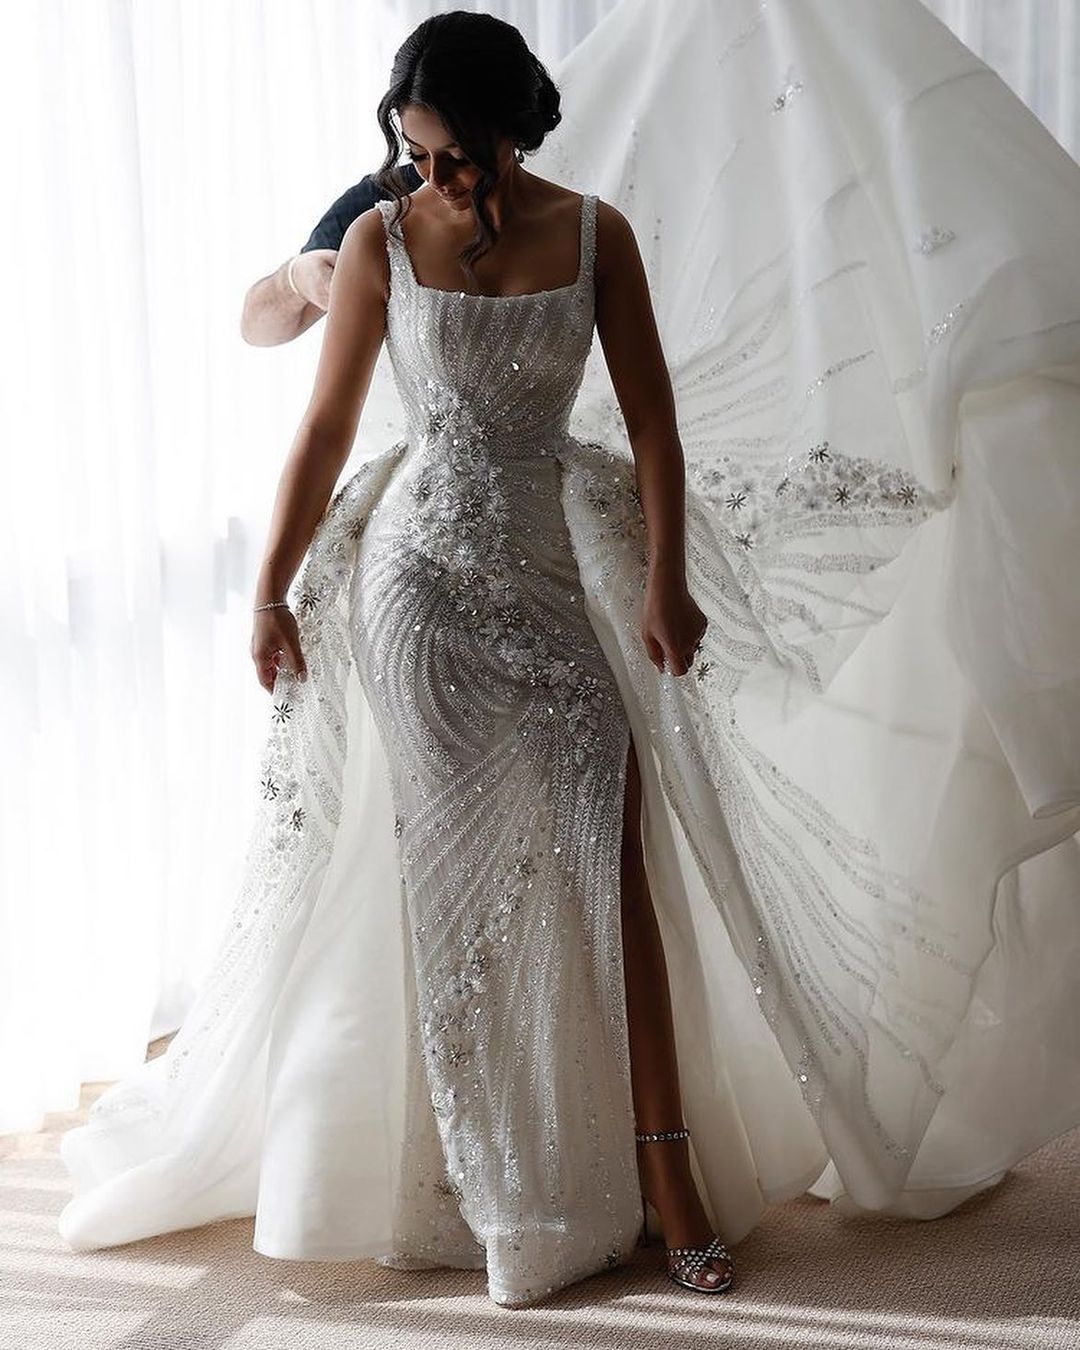 Intricate beading on this wedding gown by Steven Khalil.